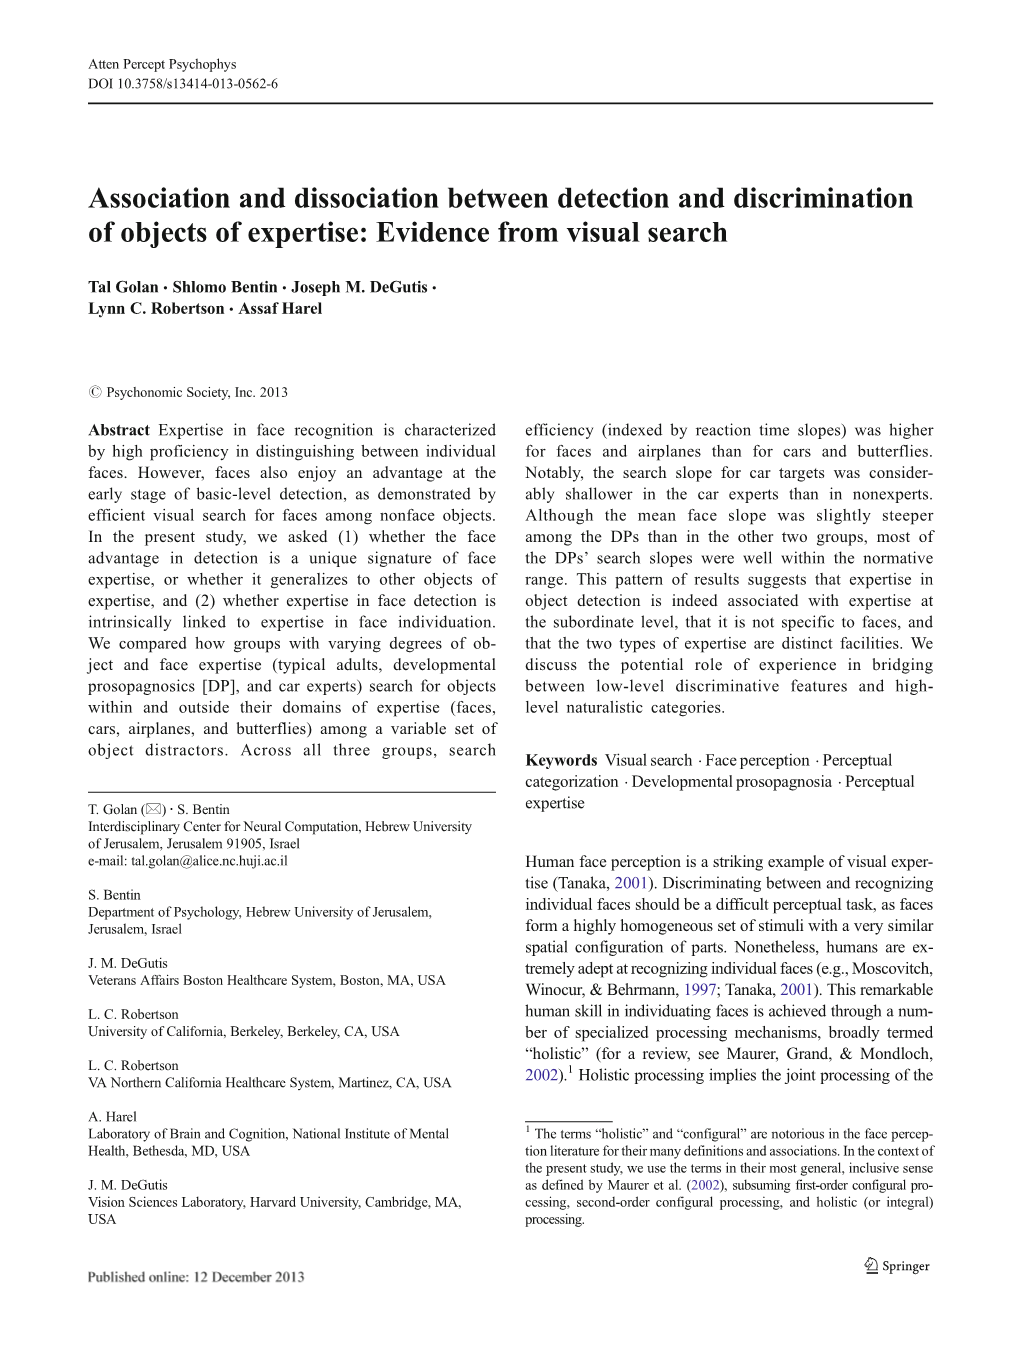 Association and Dissociation Between Detection and Discrimination of Objects of Expertise: Evidence from Visual Search